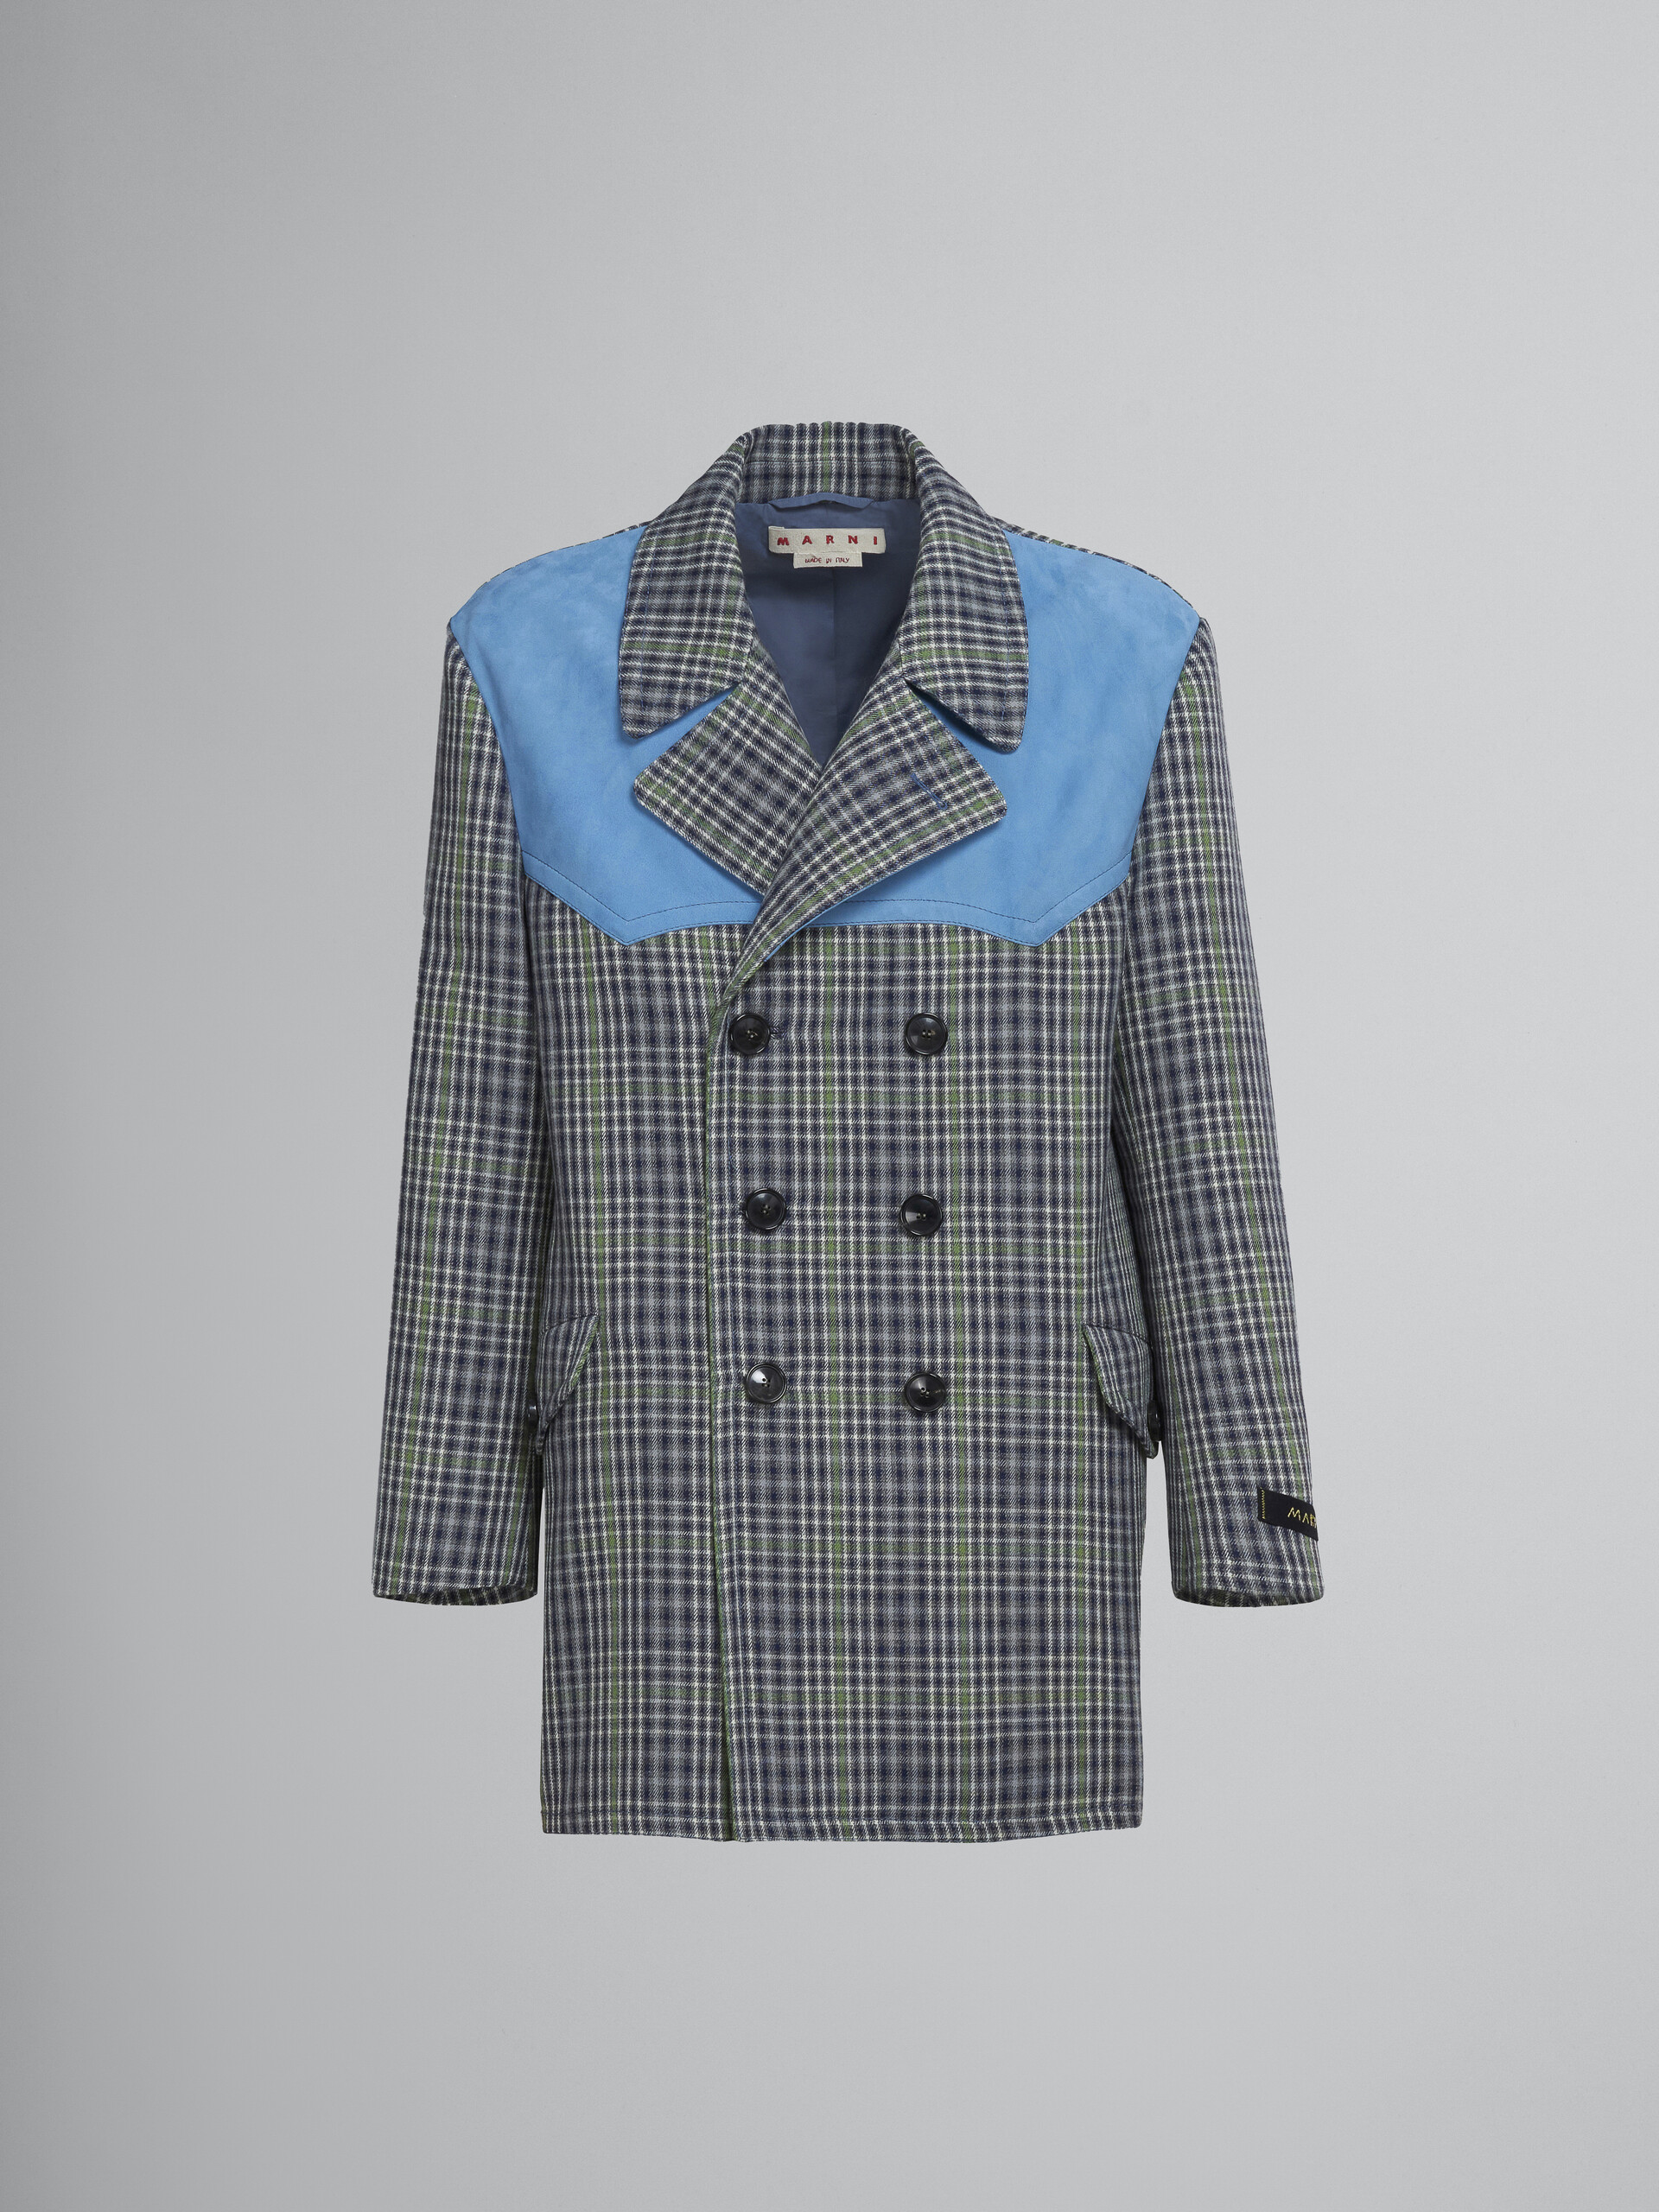 Double-breasted coat in grey chequered wool - Coat - Image 1